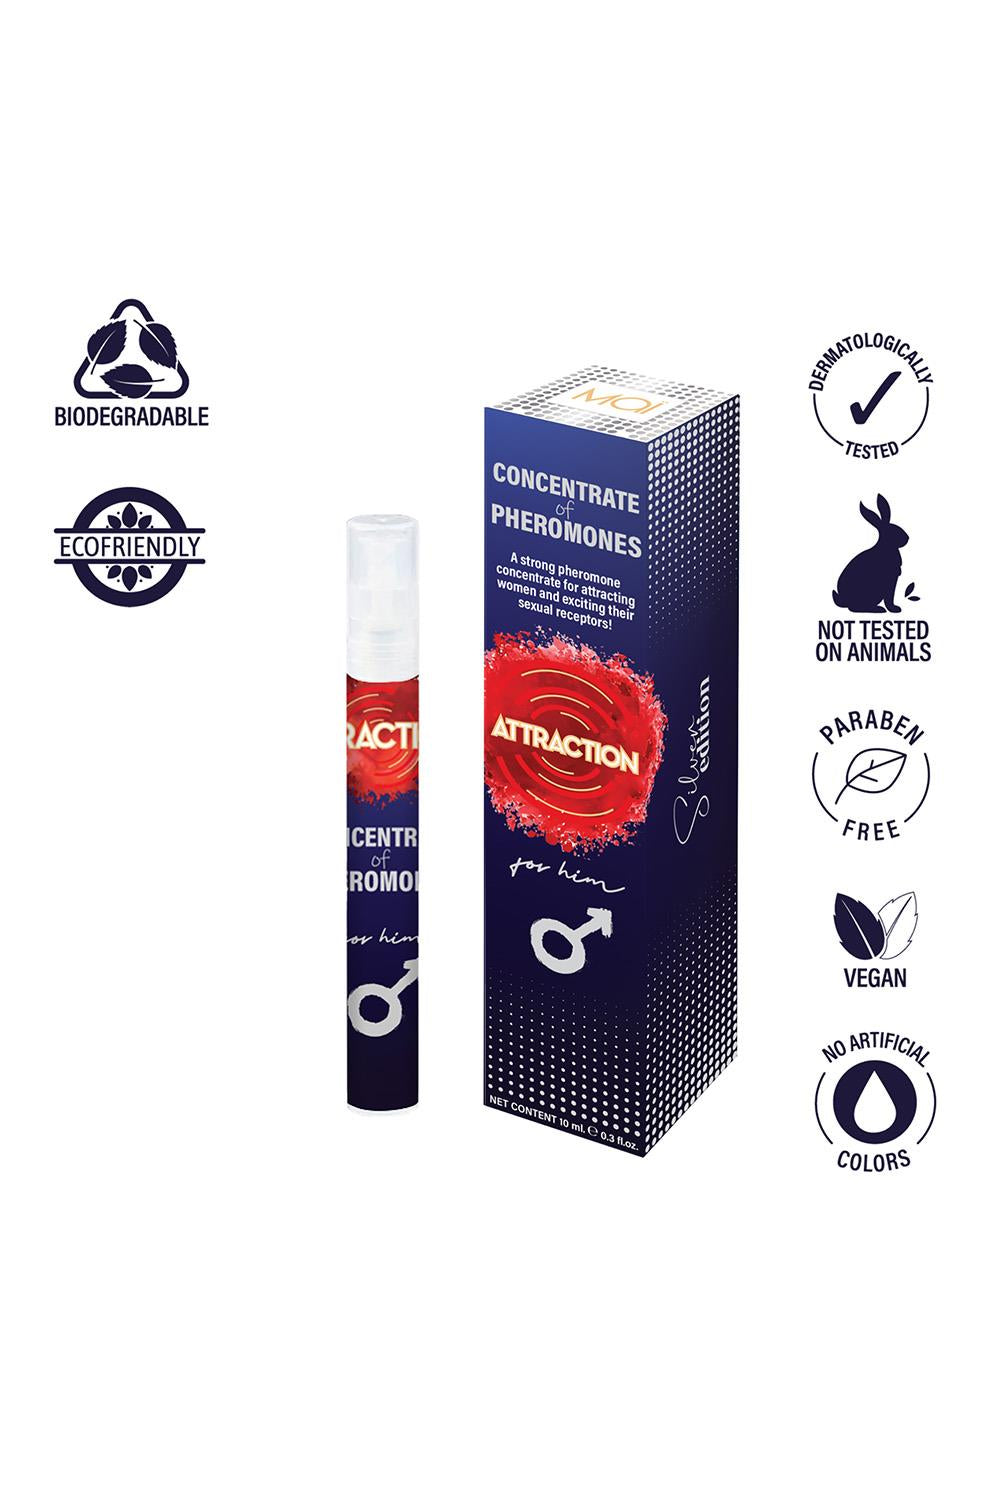 Concentrated Pheromones For Him Attraction 10 Ml